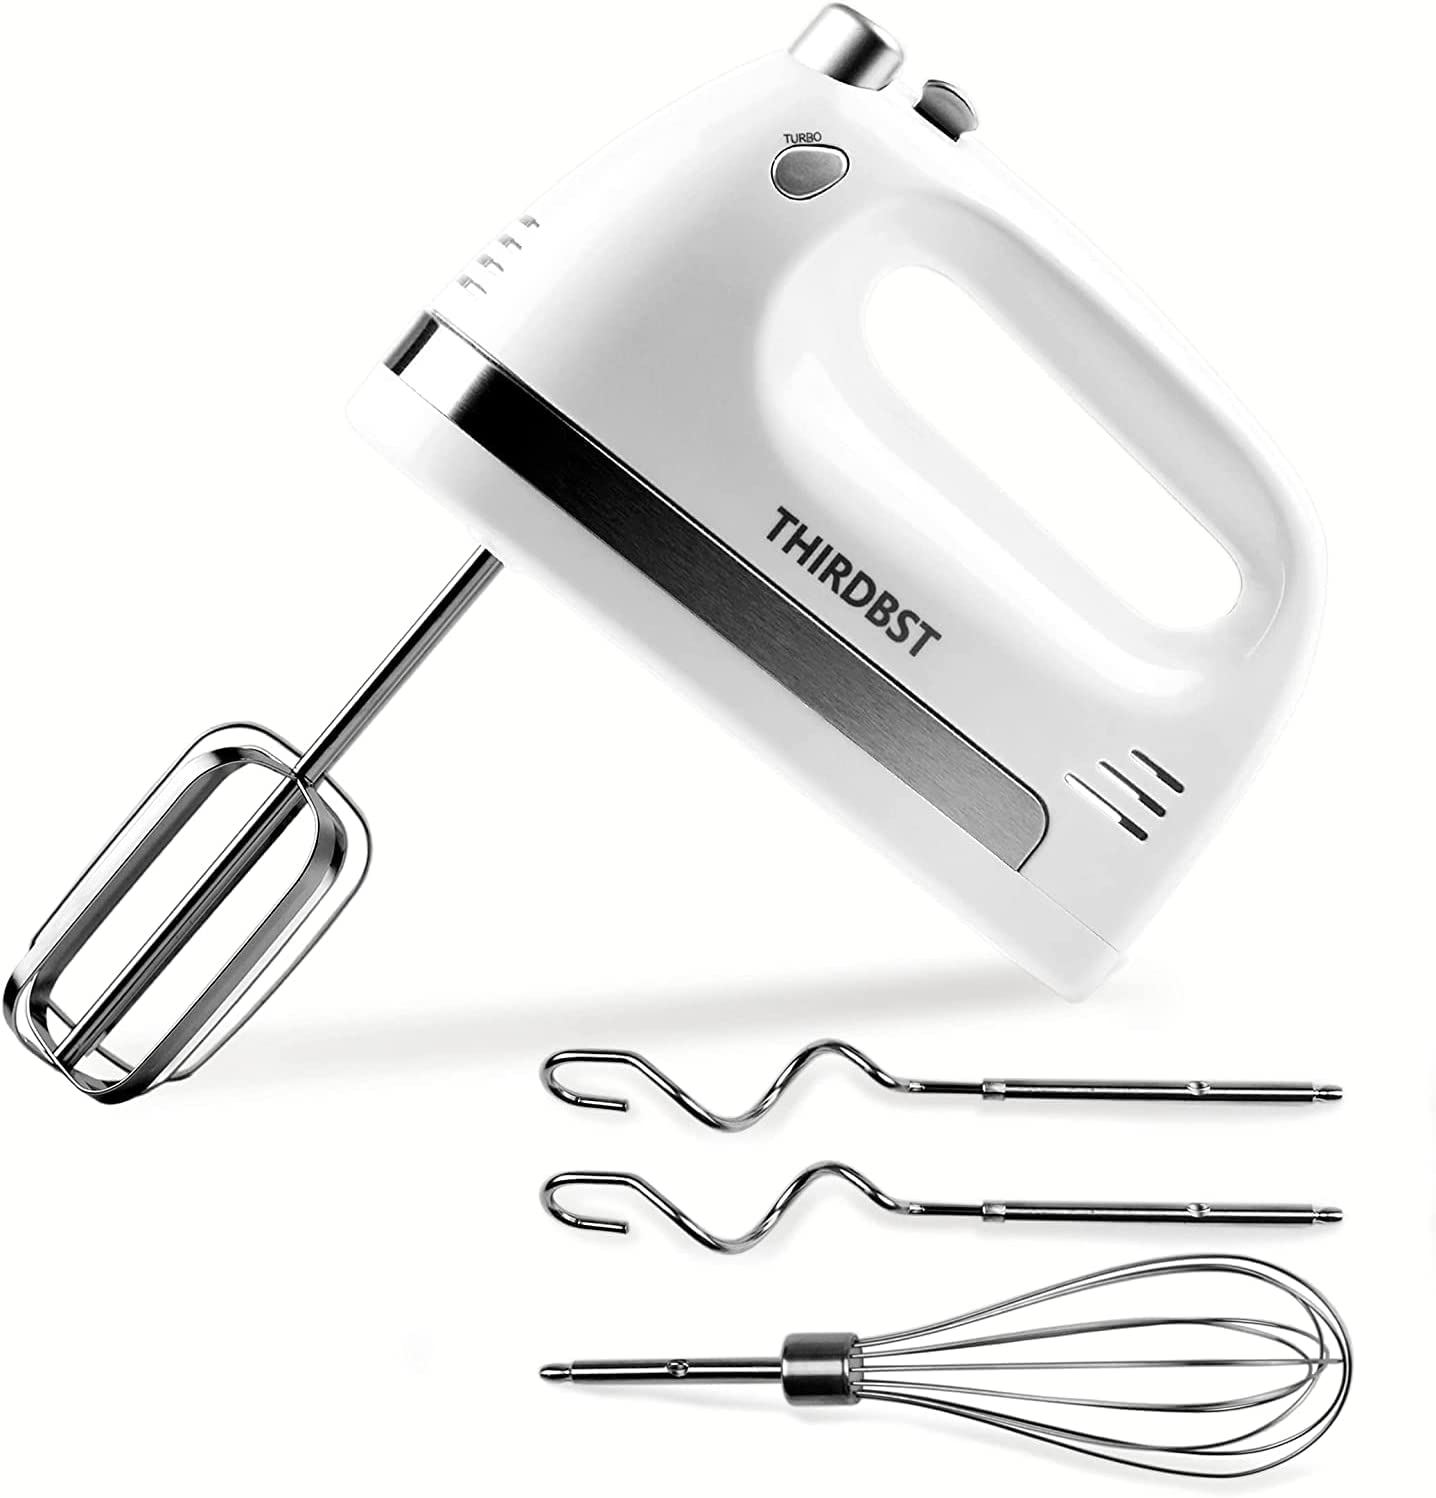 THIRDBST Electric Hand Mixer, 450 W Electric Whisk with 5 Speed and Turbo Button, Power Hand Mixer Egg Beater with Easy Eject Button, 5 Stainless Steel Attachments for Baking, Biscuits, Cakes